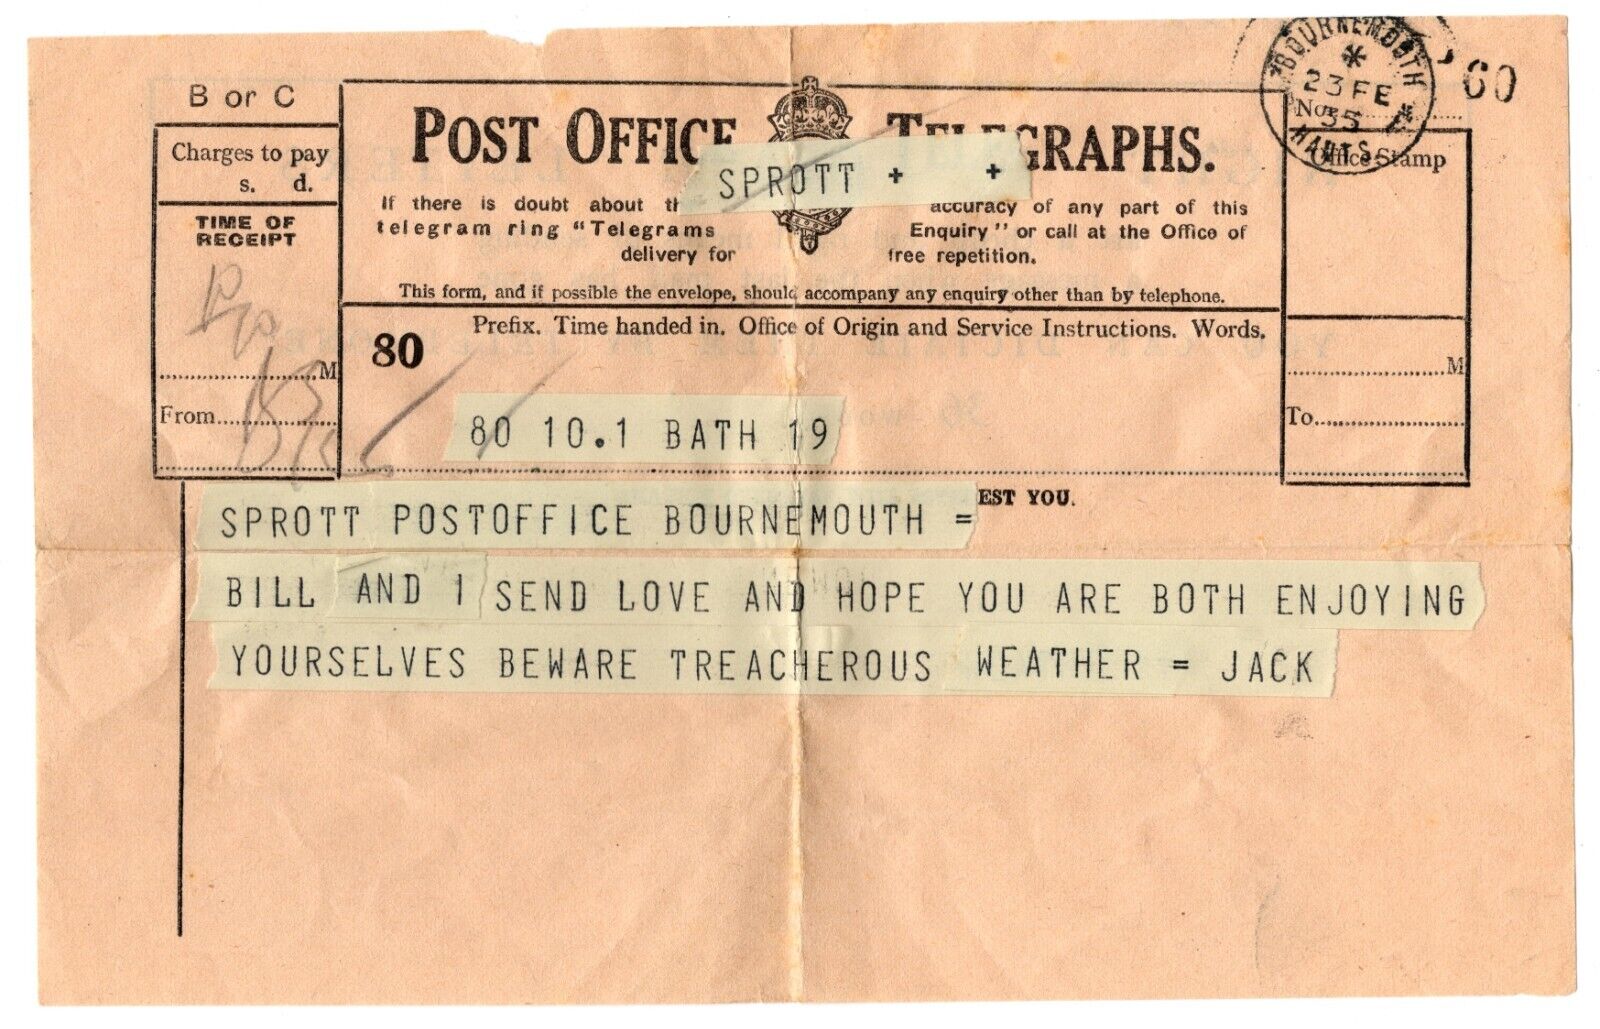 PO Telegraph Form of 23-2-1935 - front